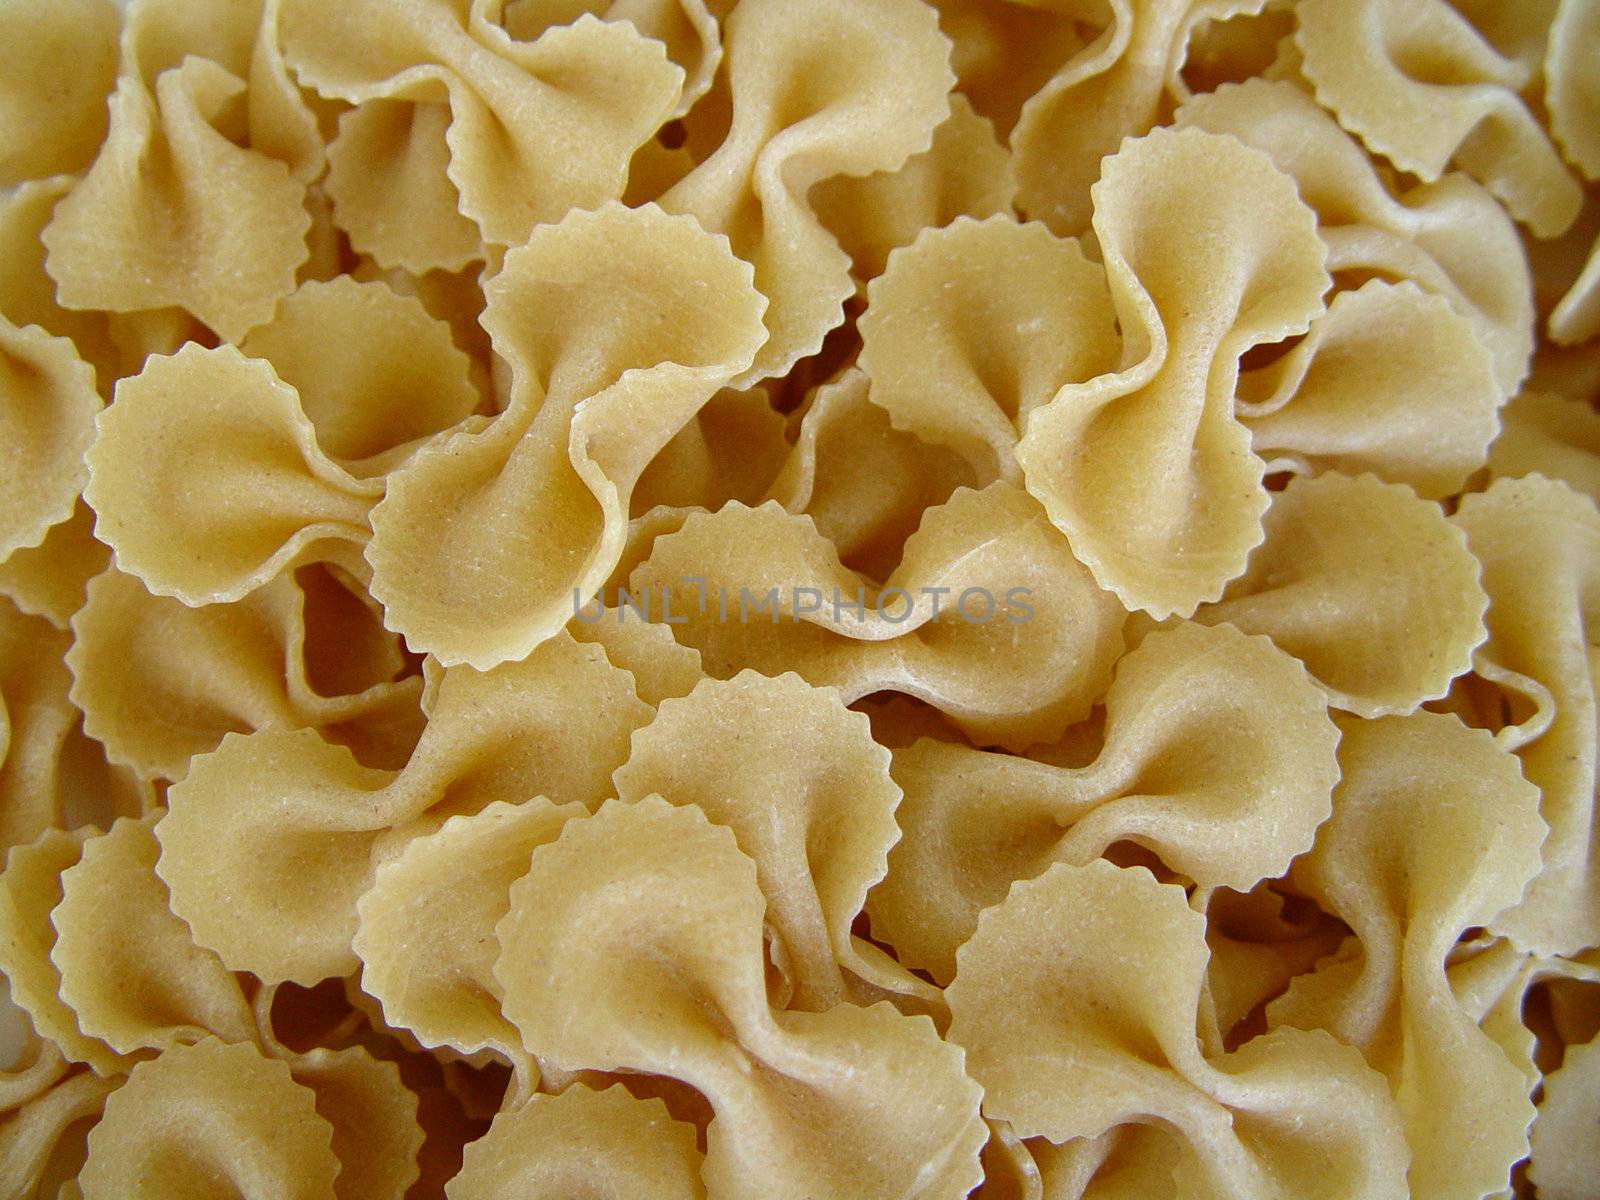 Raw pasta covering all the image background.         